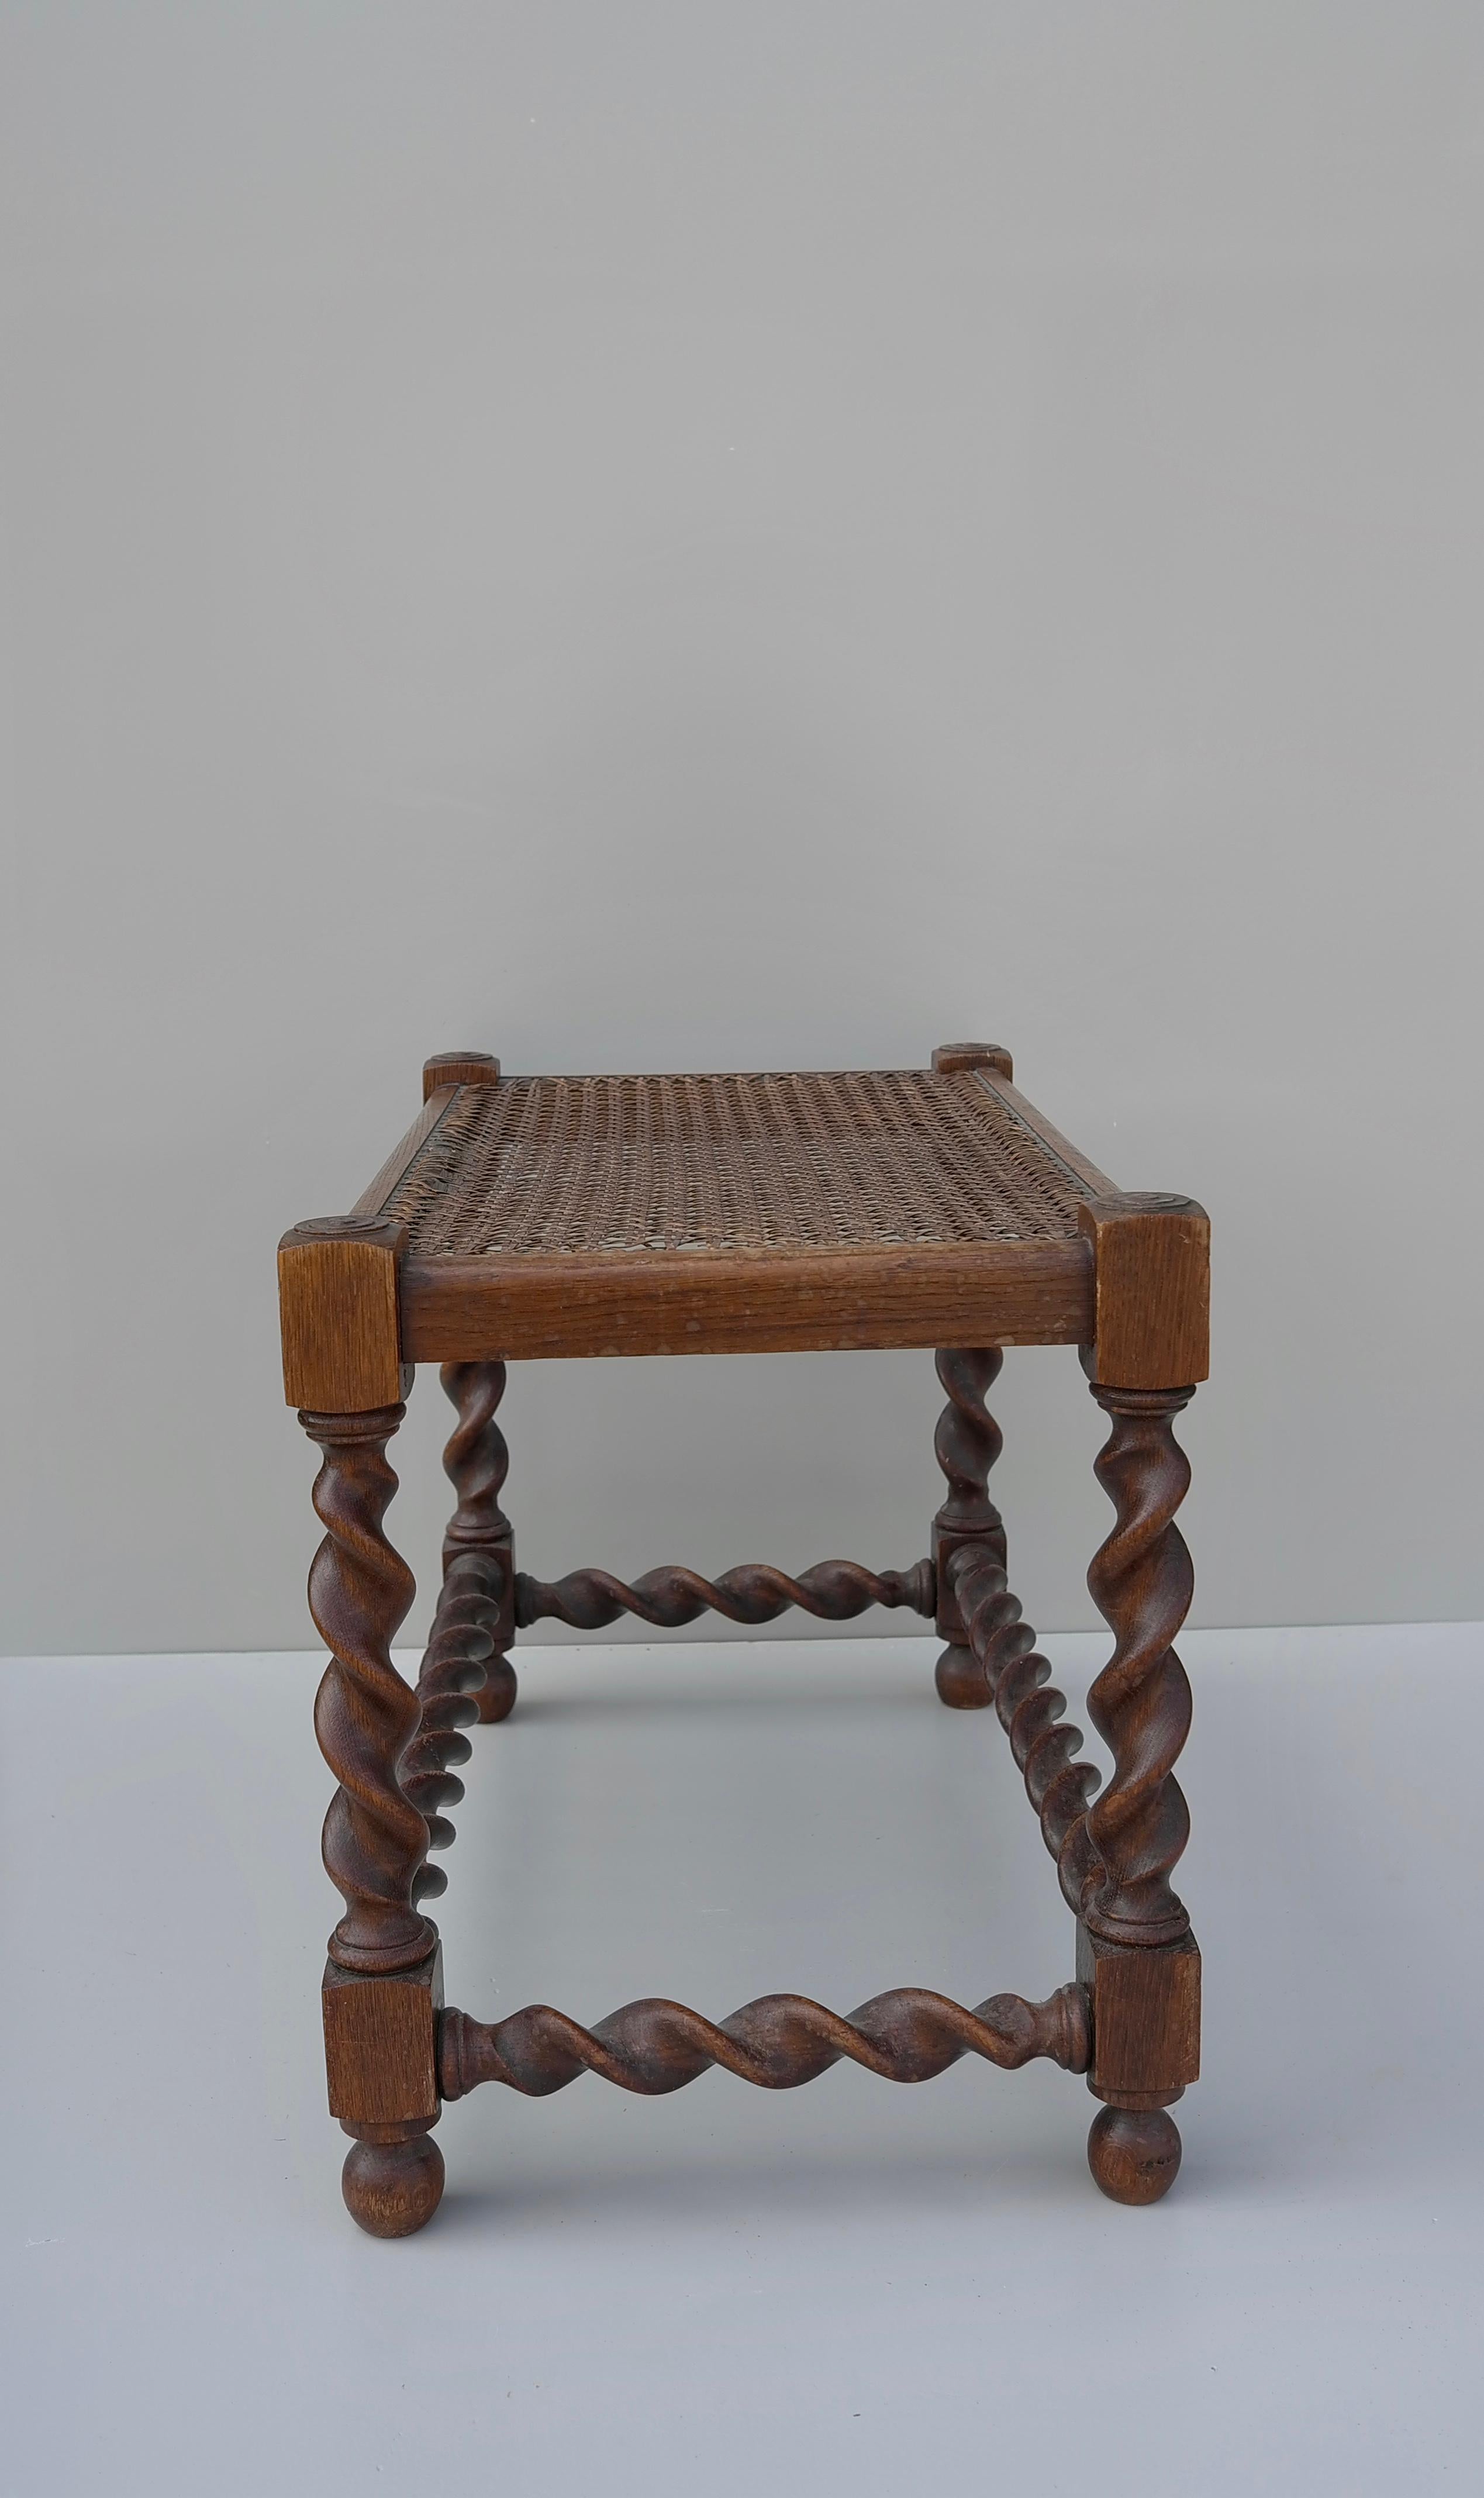 Mid-20th Century Dark Wooden Bench or Side Table with Cane Seat, France, 1930's For Sale